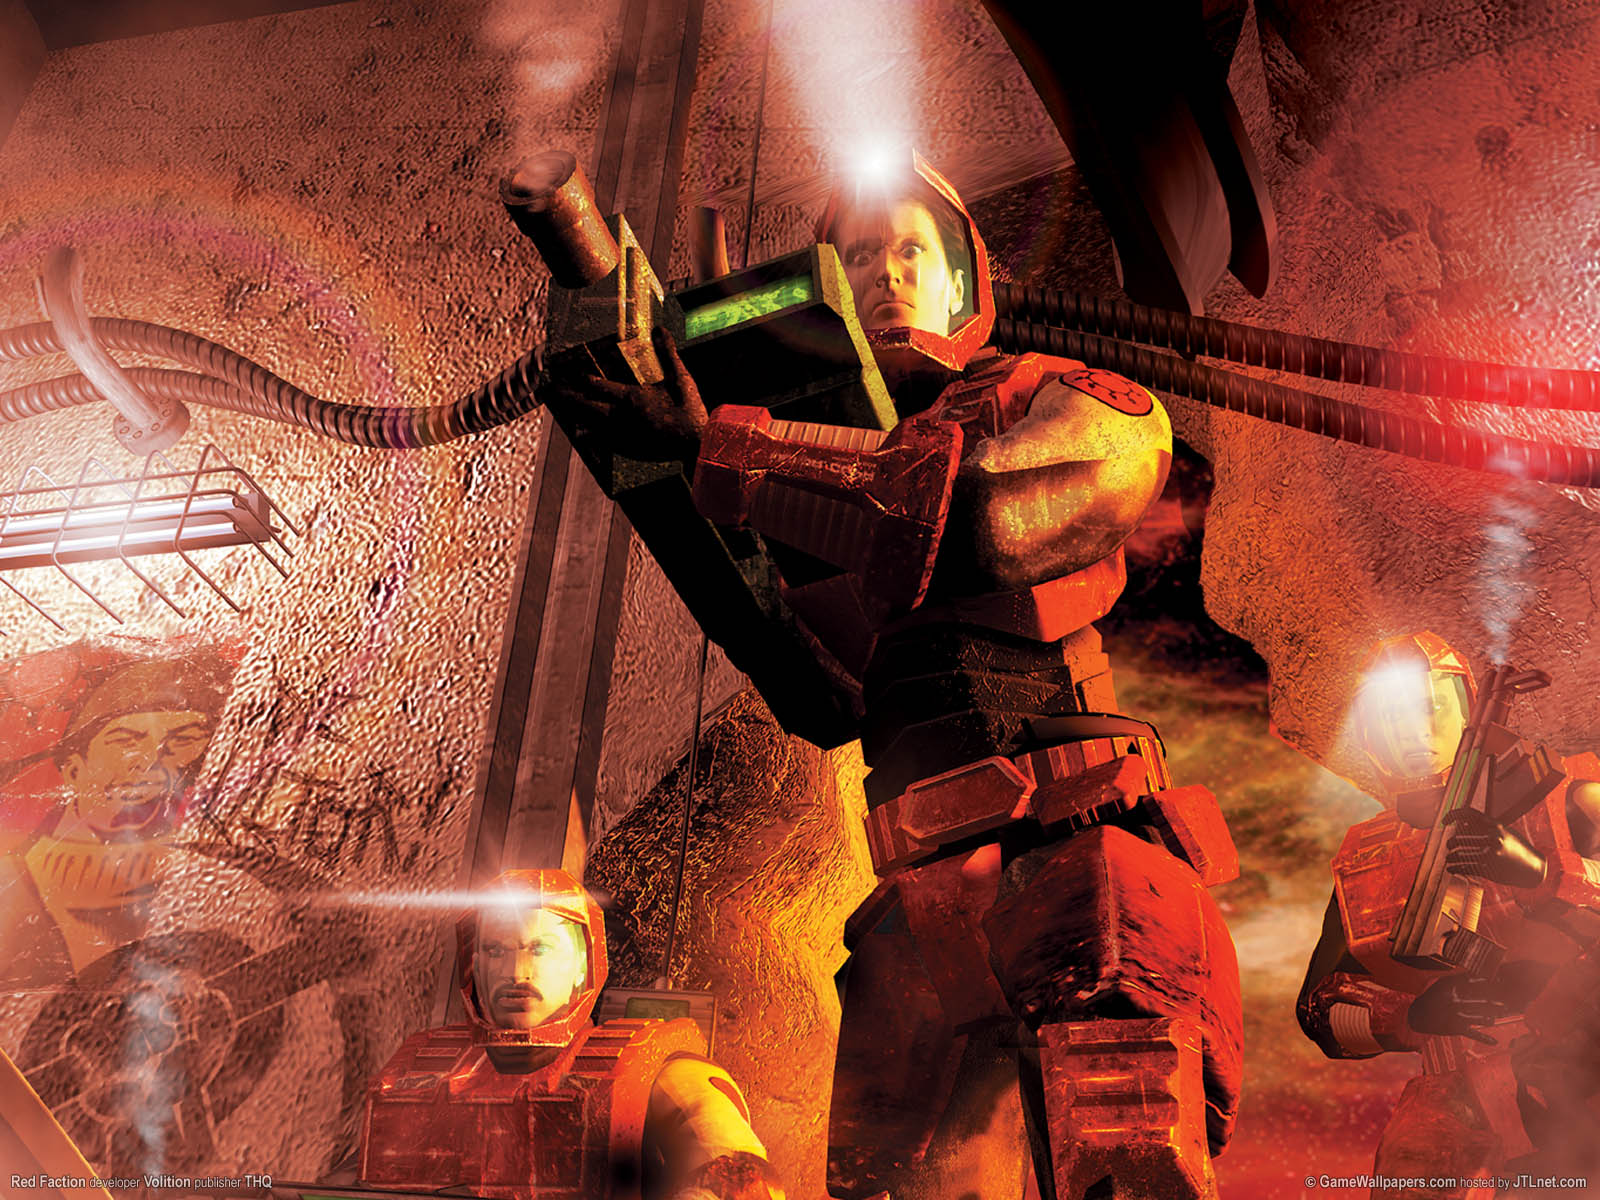 Red Faction wallpaper 01 1600x1200